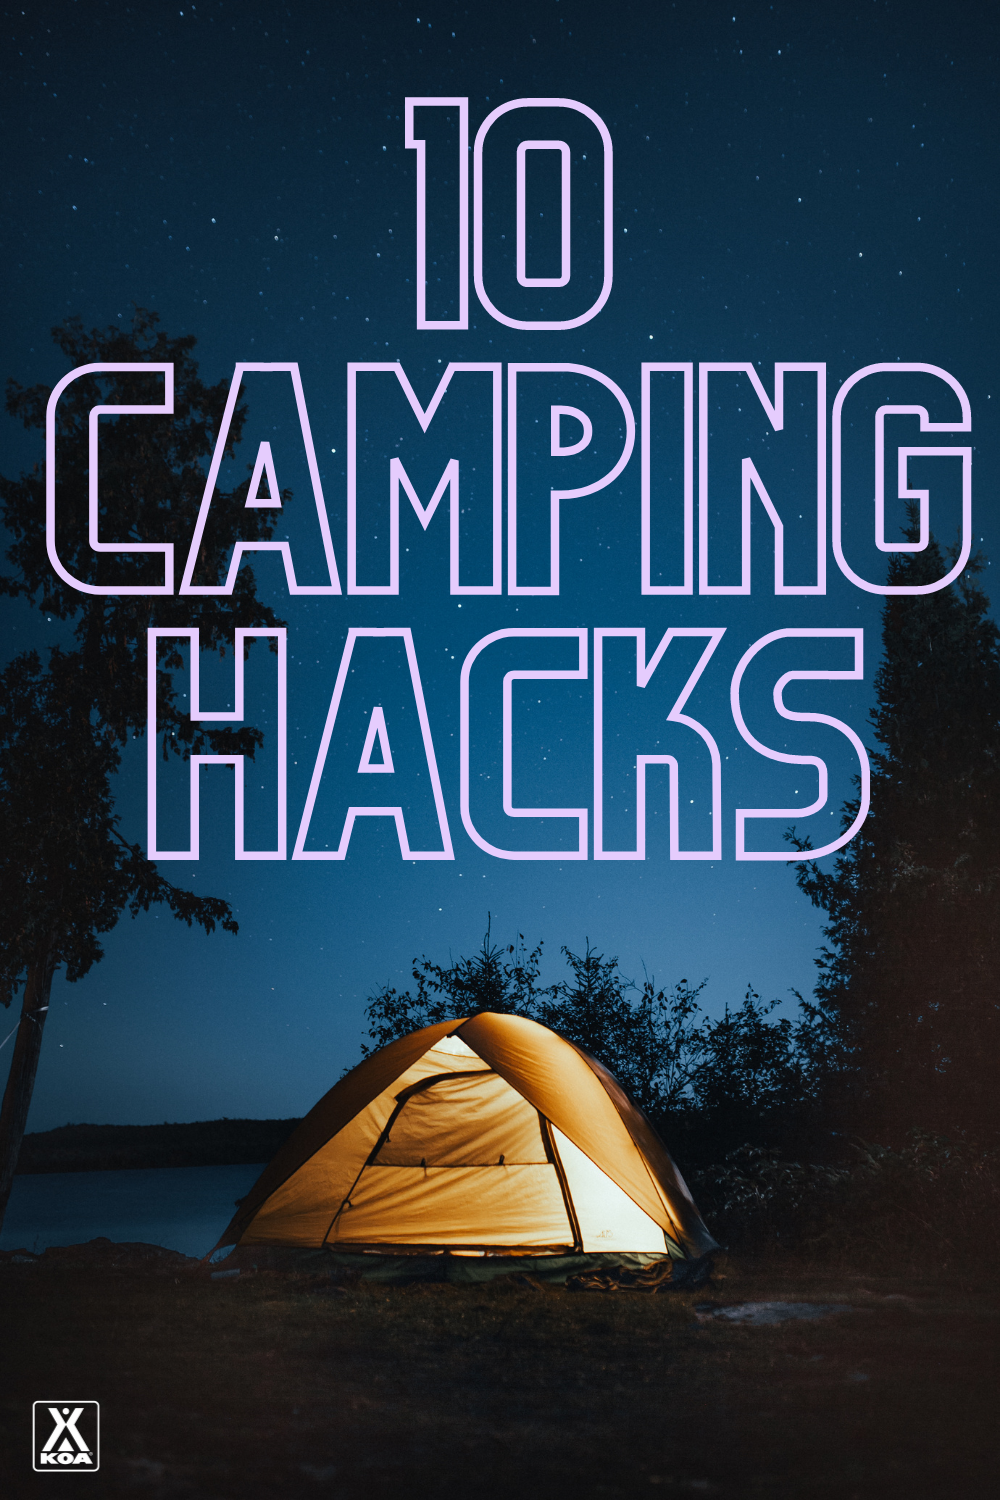 Among the countless joys of camping are those little tricks you learn over time that streamline your pre-trip packing or campsite setup, boost your comfort while “roughing it,” or otherwise make operations that much more efficient or enjoyable.